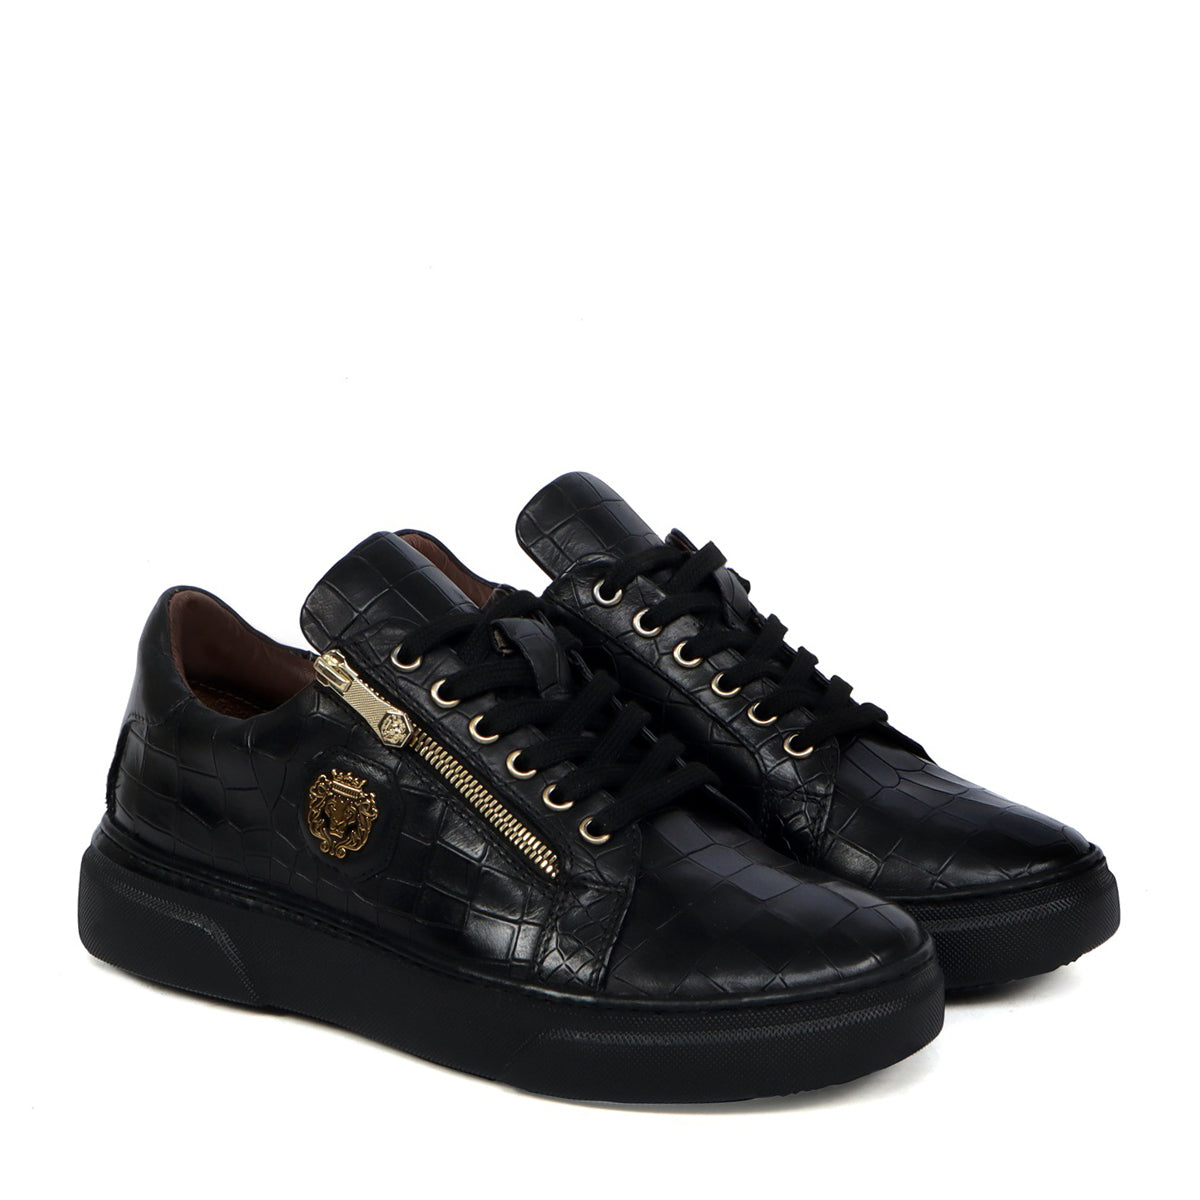 Zipper Black Sneaker in Full Deep Cut Leather with Lace-Up Closure